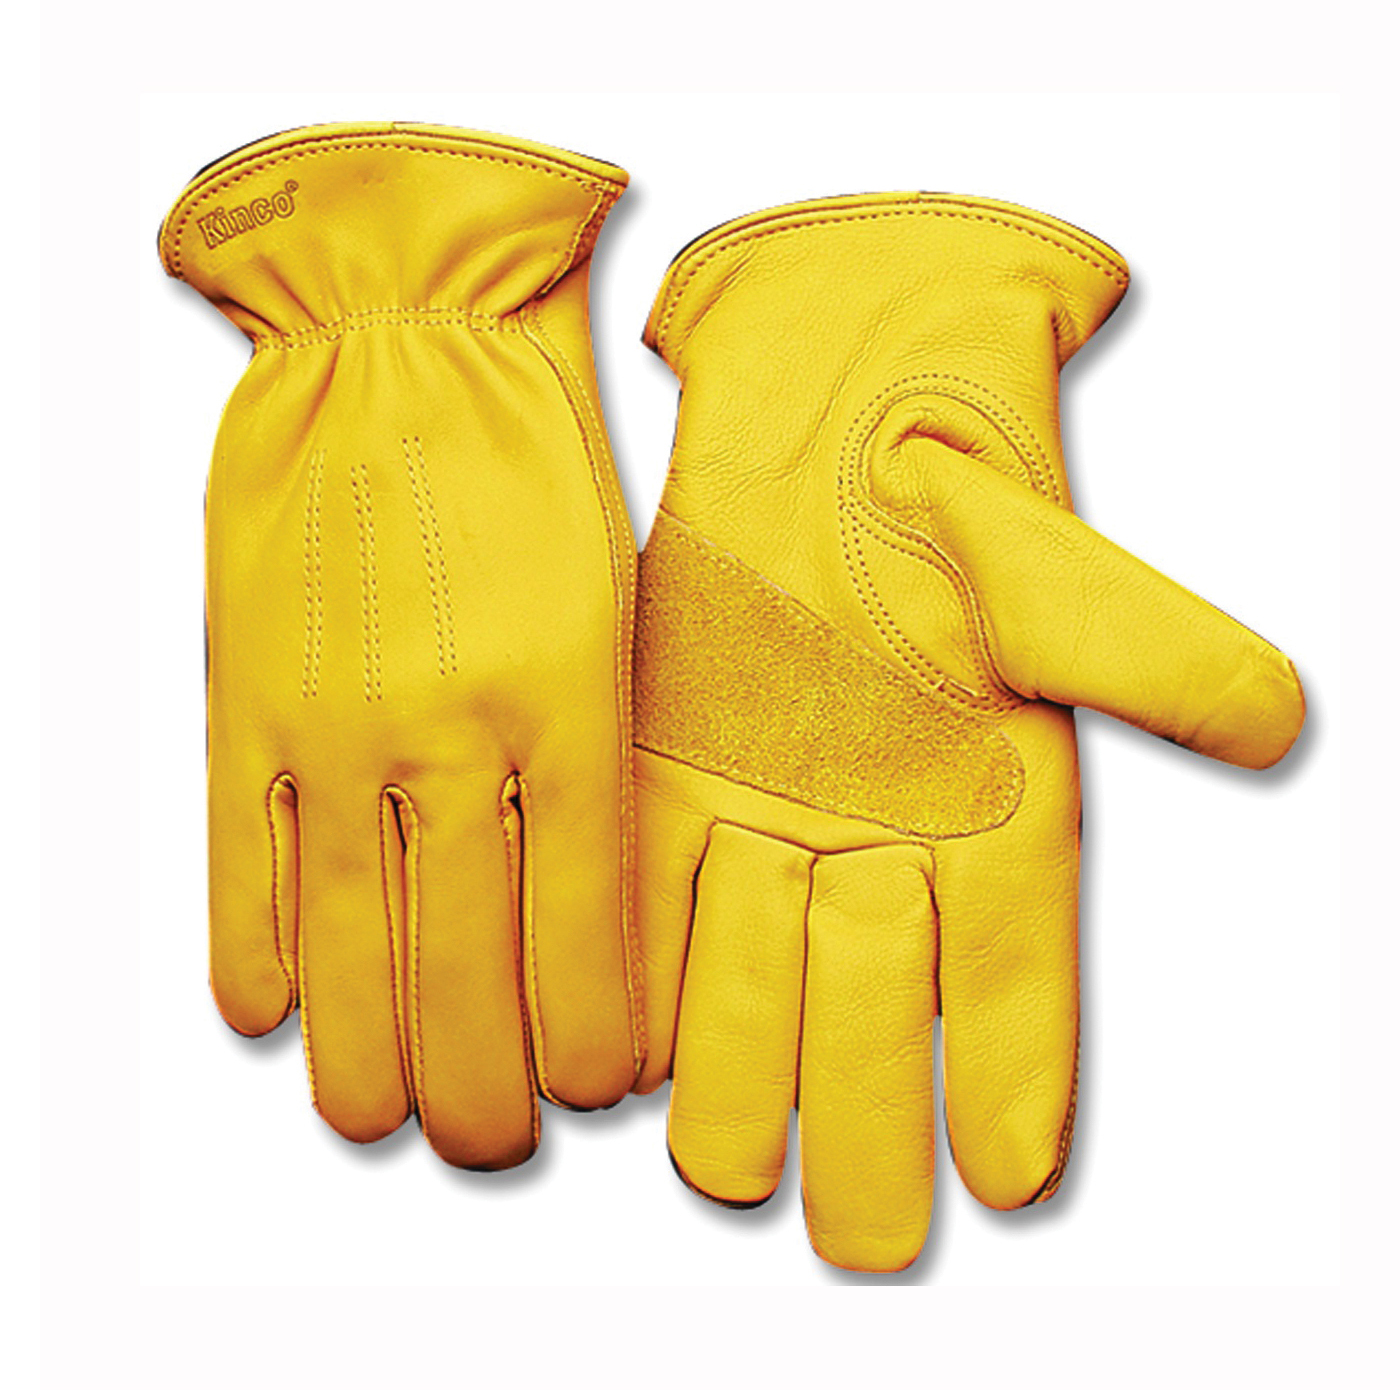 198HK-L Premium-Grade Driver Gloves, Men's, L, 11 in L, Keystone Thumb, Easy-On Cuff, Cowhide Leather, Gold